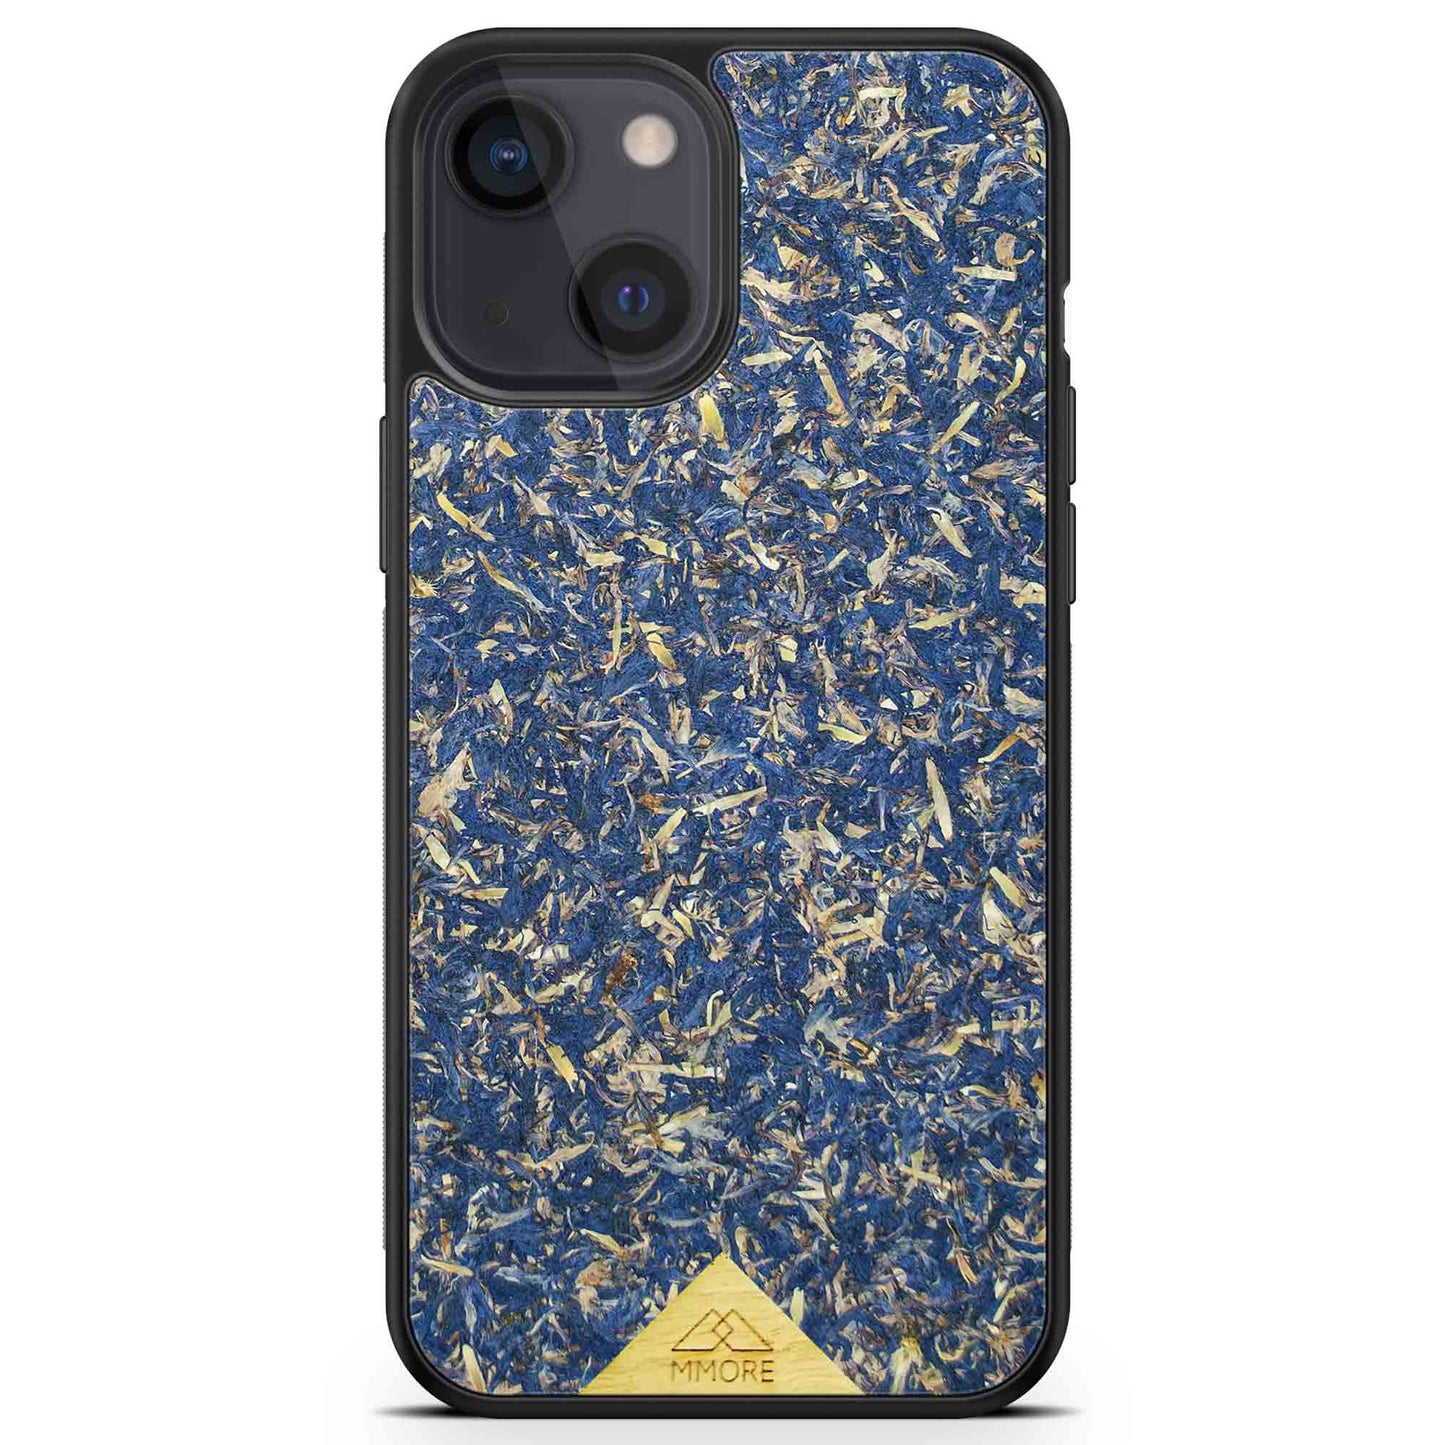 Organic blue cornflower phone case full protection durable and drop tested